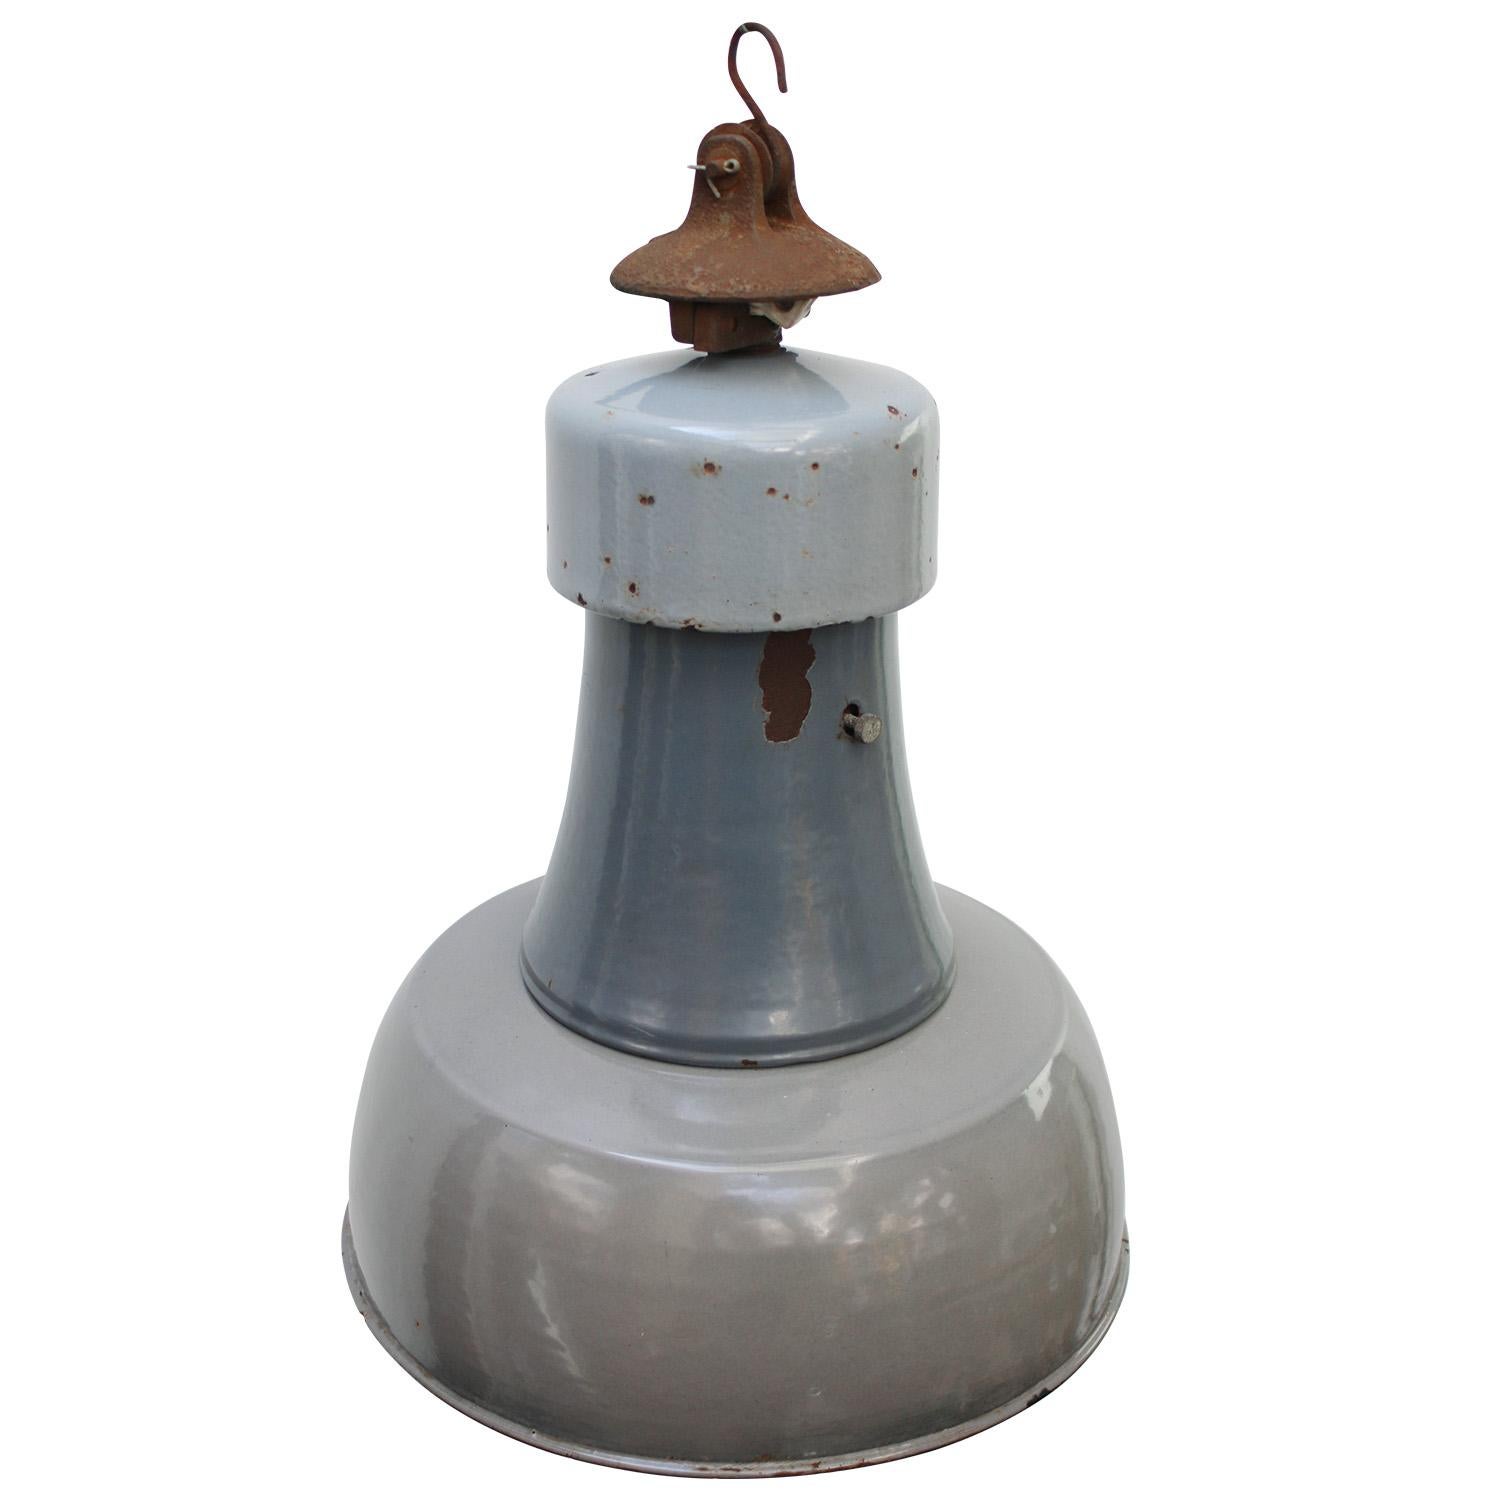 Dutch enamel industrial pendant
blue grey enamel shade, cast iron top, white inside.

Weight: 3.80 kg / 8.4 lb

Priced per individual item. All lamps have been made suitable by international standards for incandescent light bulbs, energy-efficient